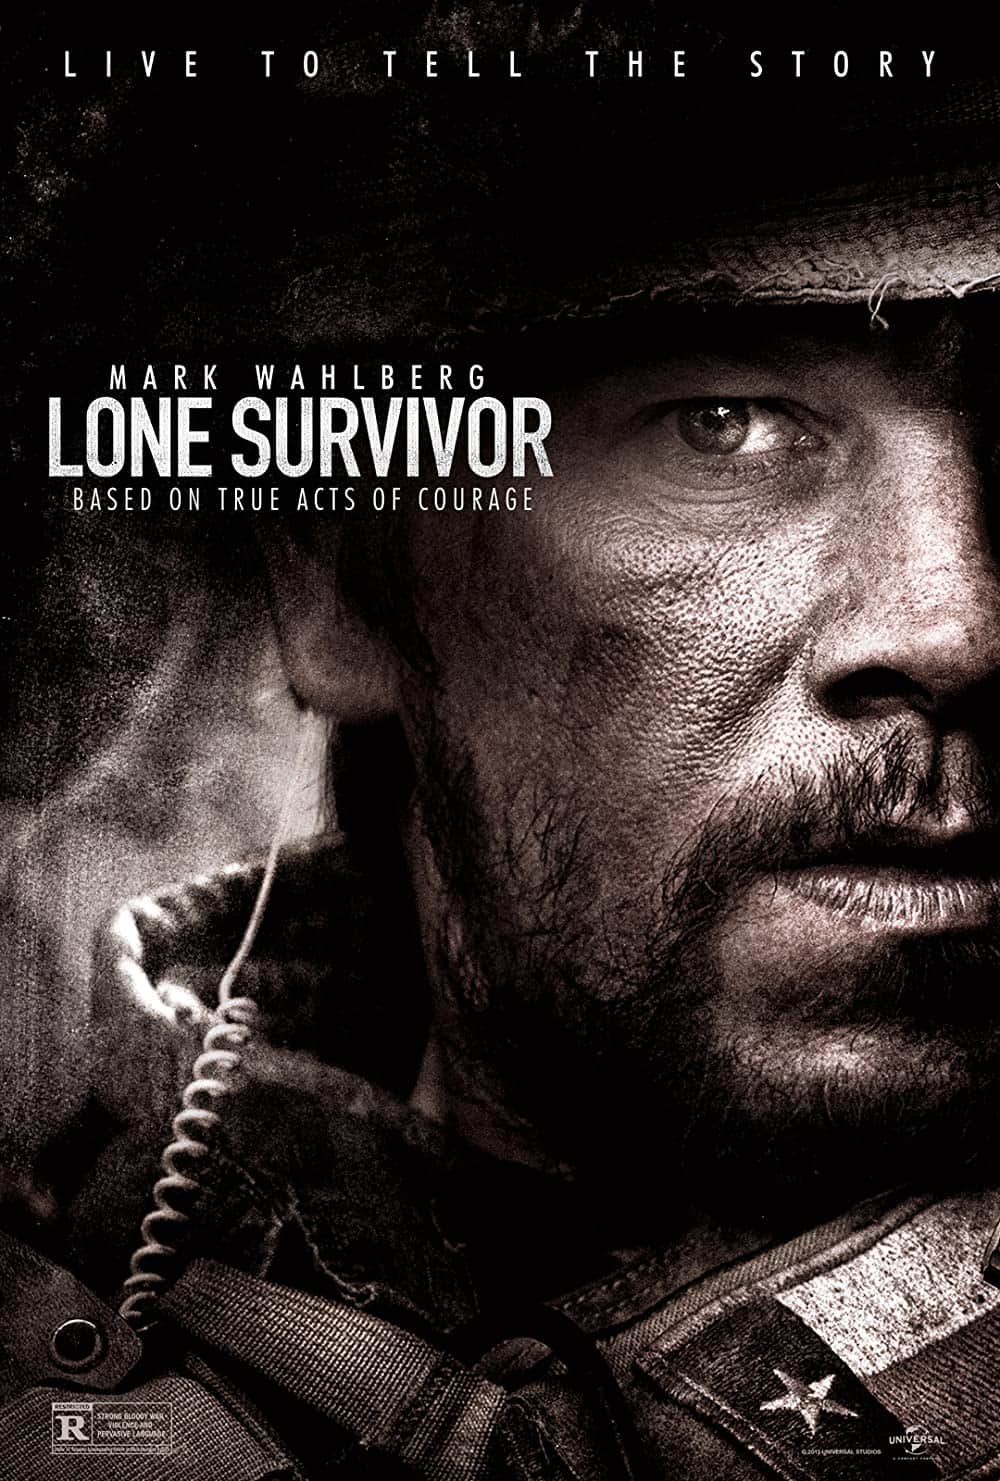 Lone Survivor (2013) Best Special Forces Movies You Can't Miss